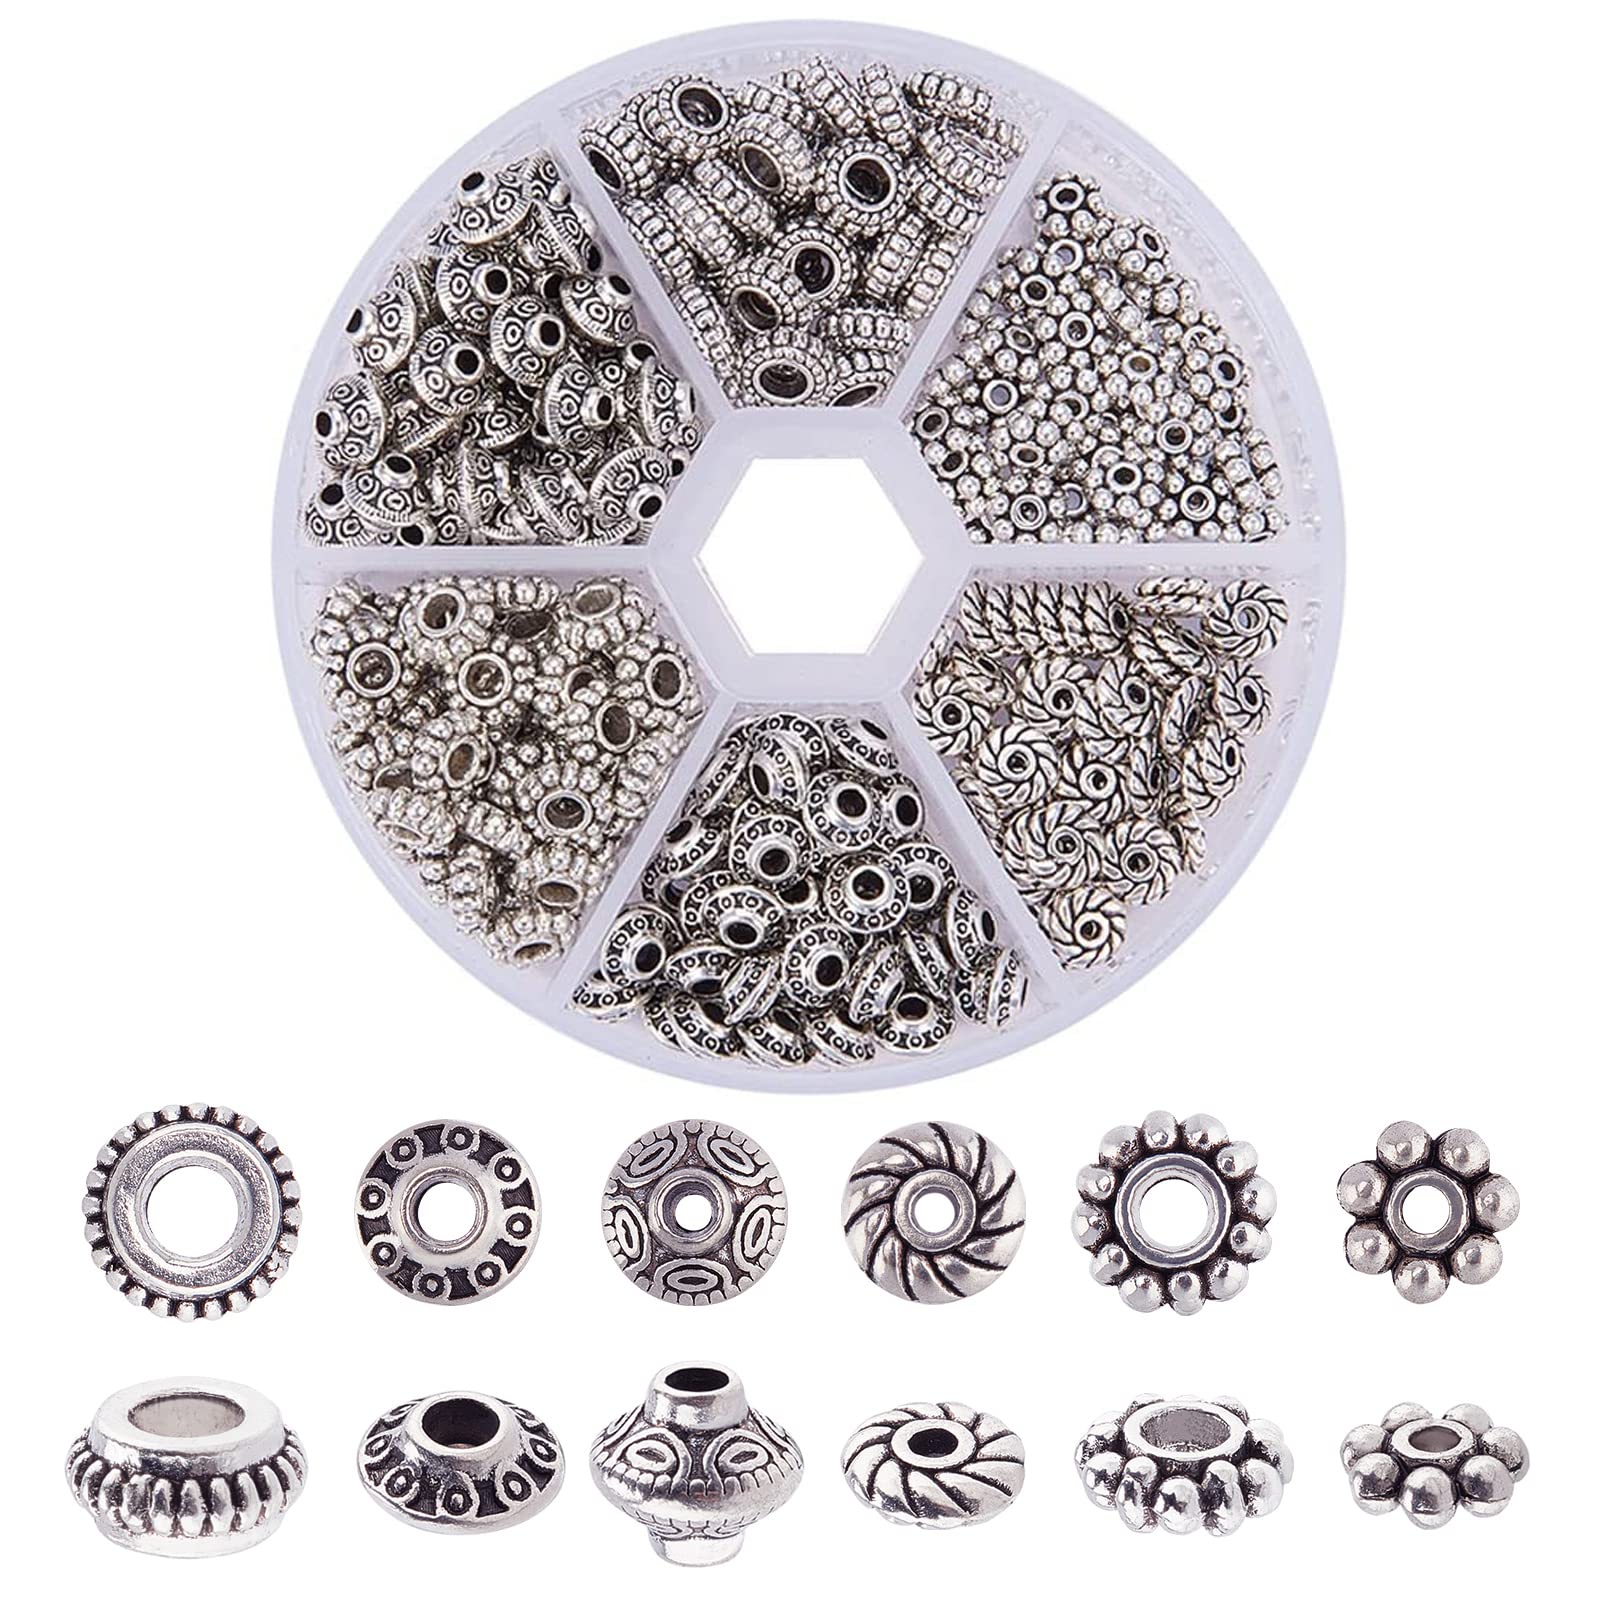 PH PandaHall 300pcs 6 Style Antique Silver Spacer Beads, Tibetan Metal Alloy Tube Spacers Flower Flat Rondelle Small Loose Beads